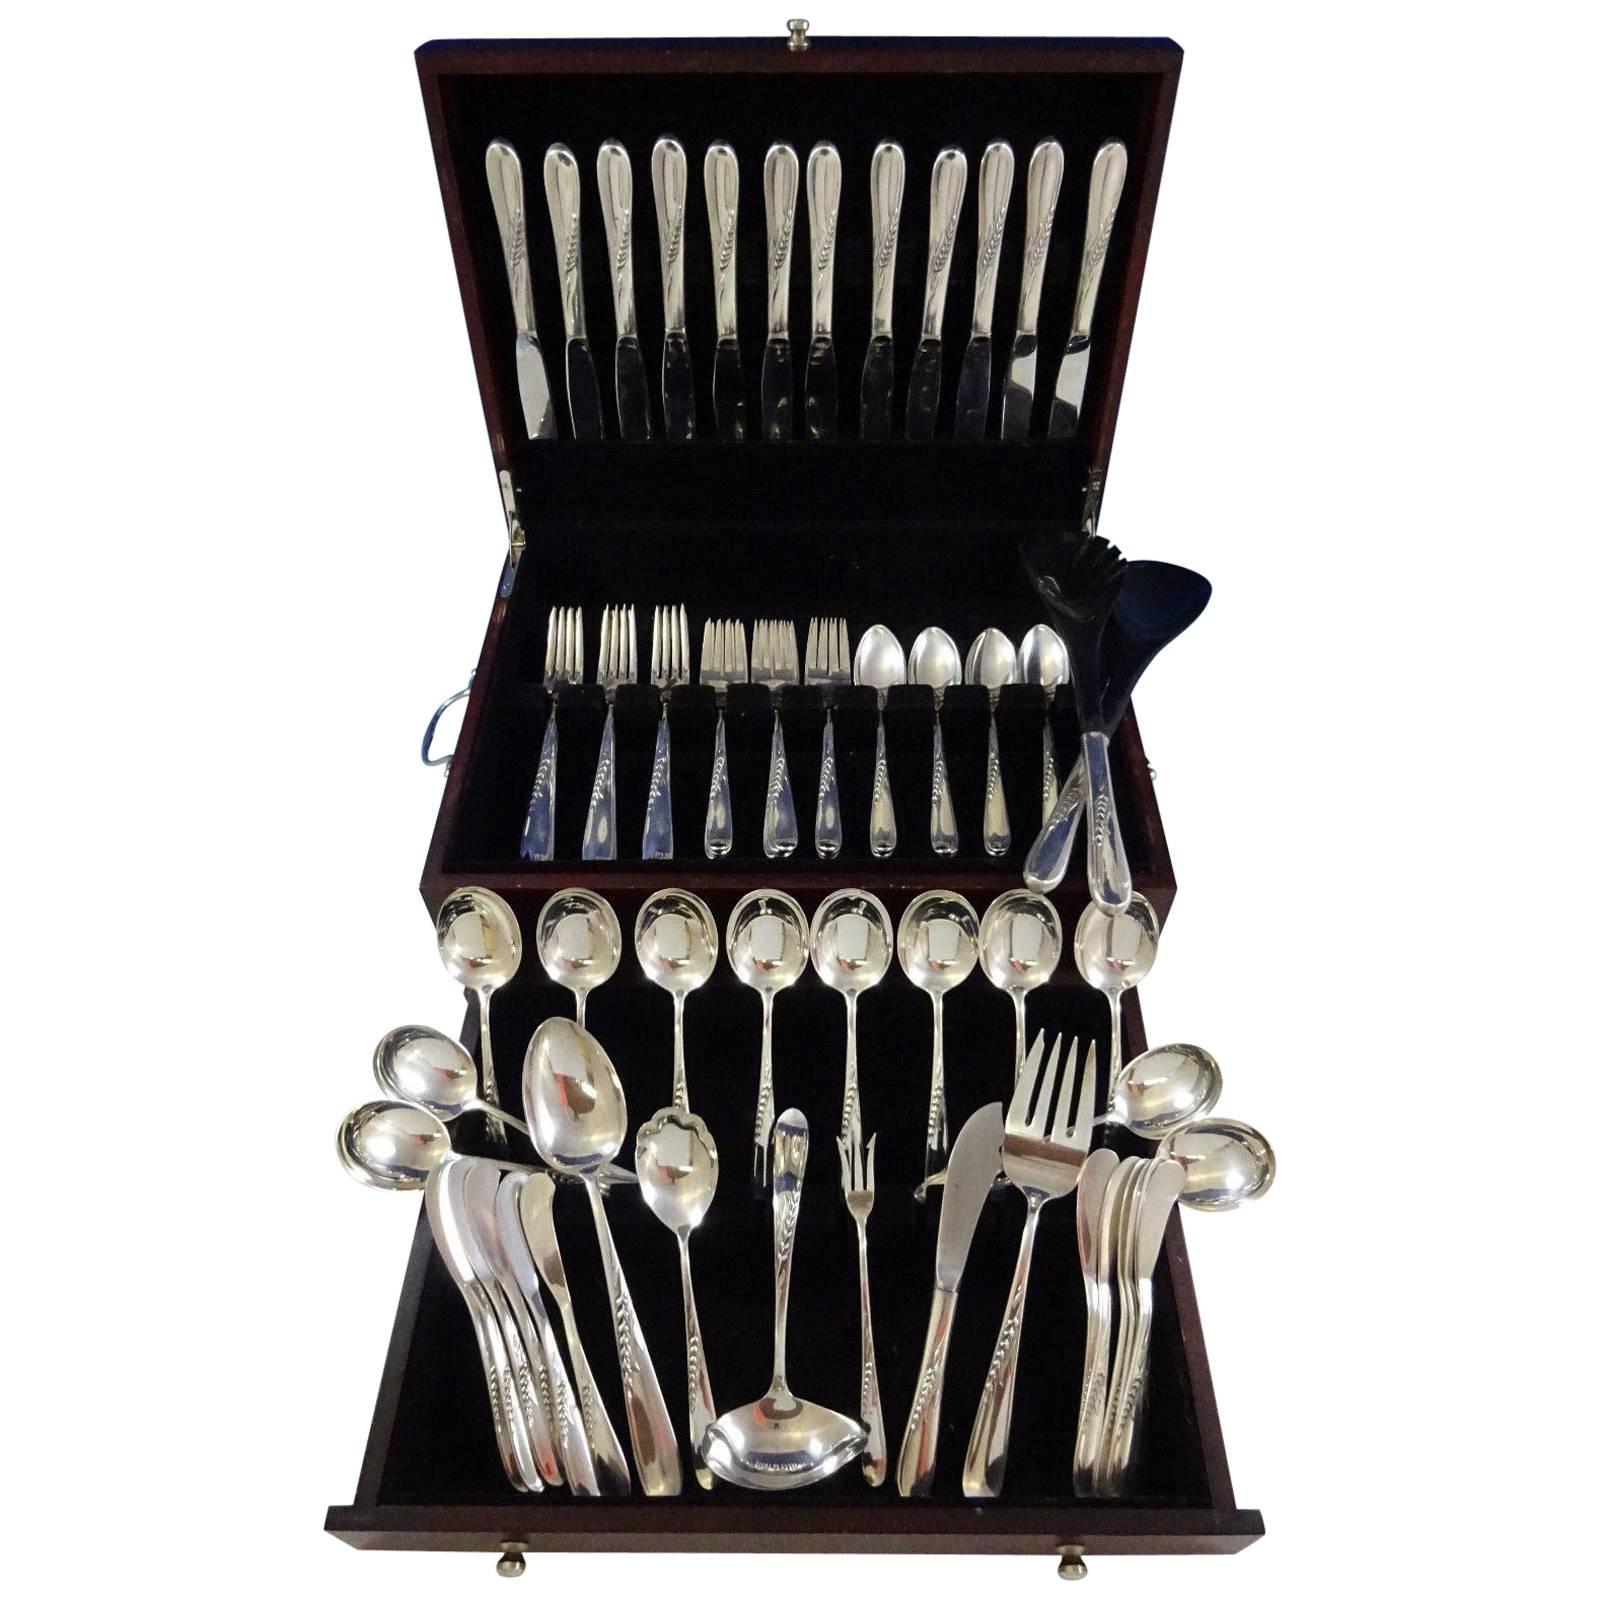 Silver wheat by Reed & Barton sterling silver flatware set, 80 pieces. This set includes:

12 knives, 8 3/4